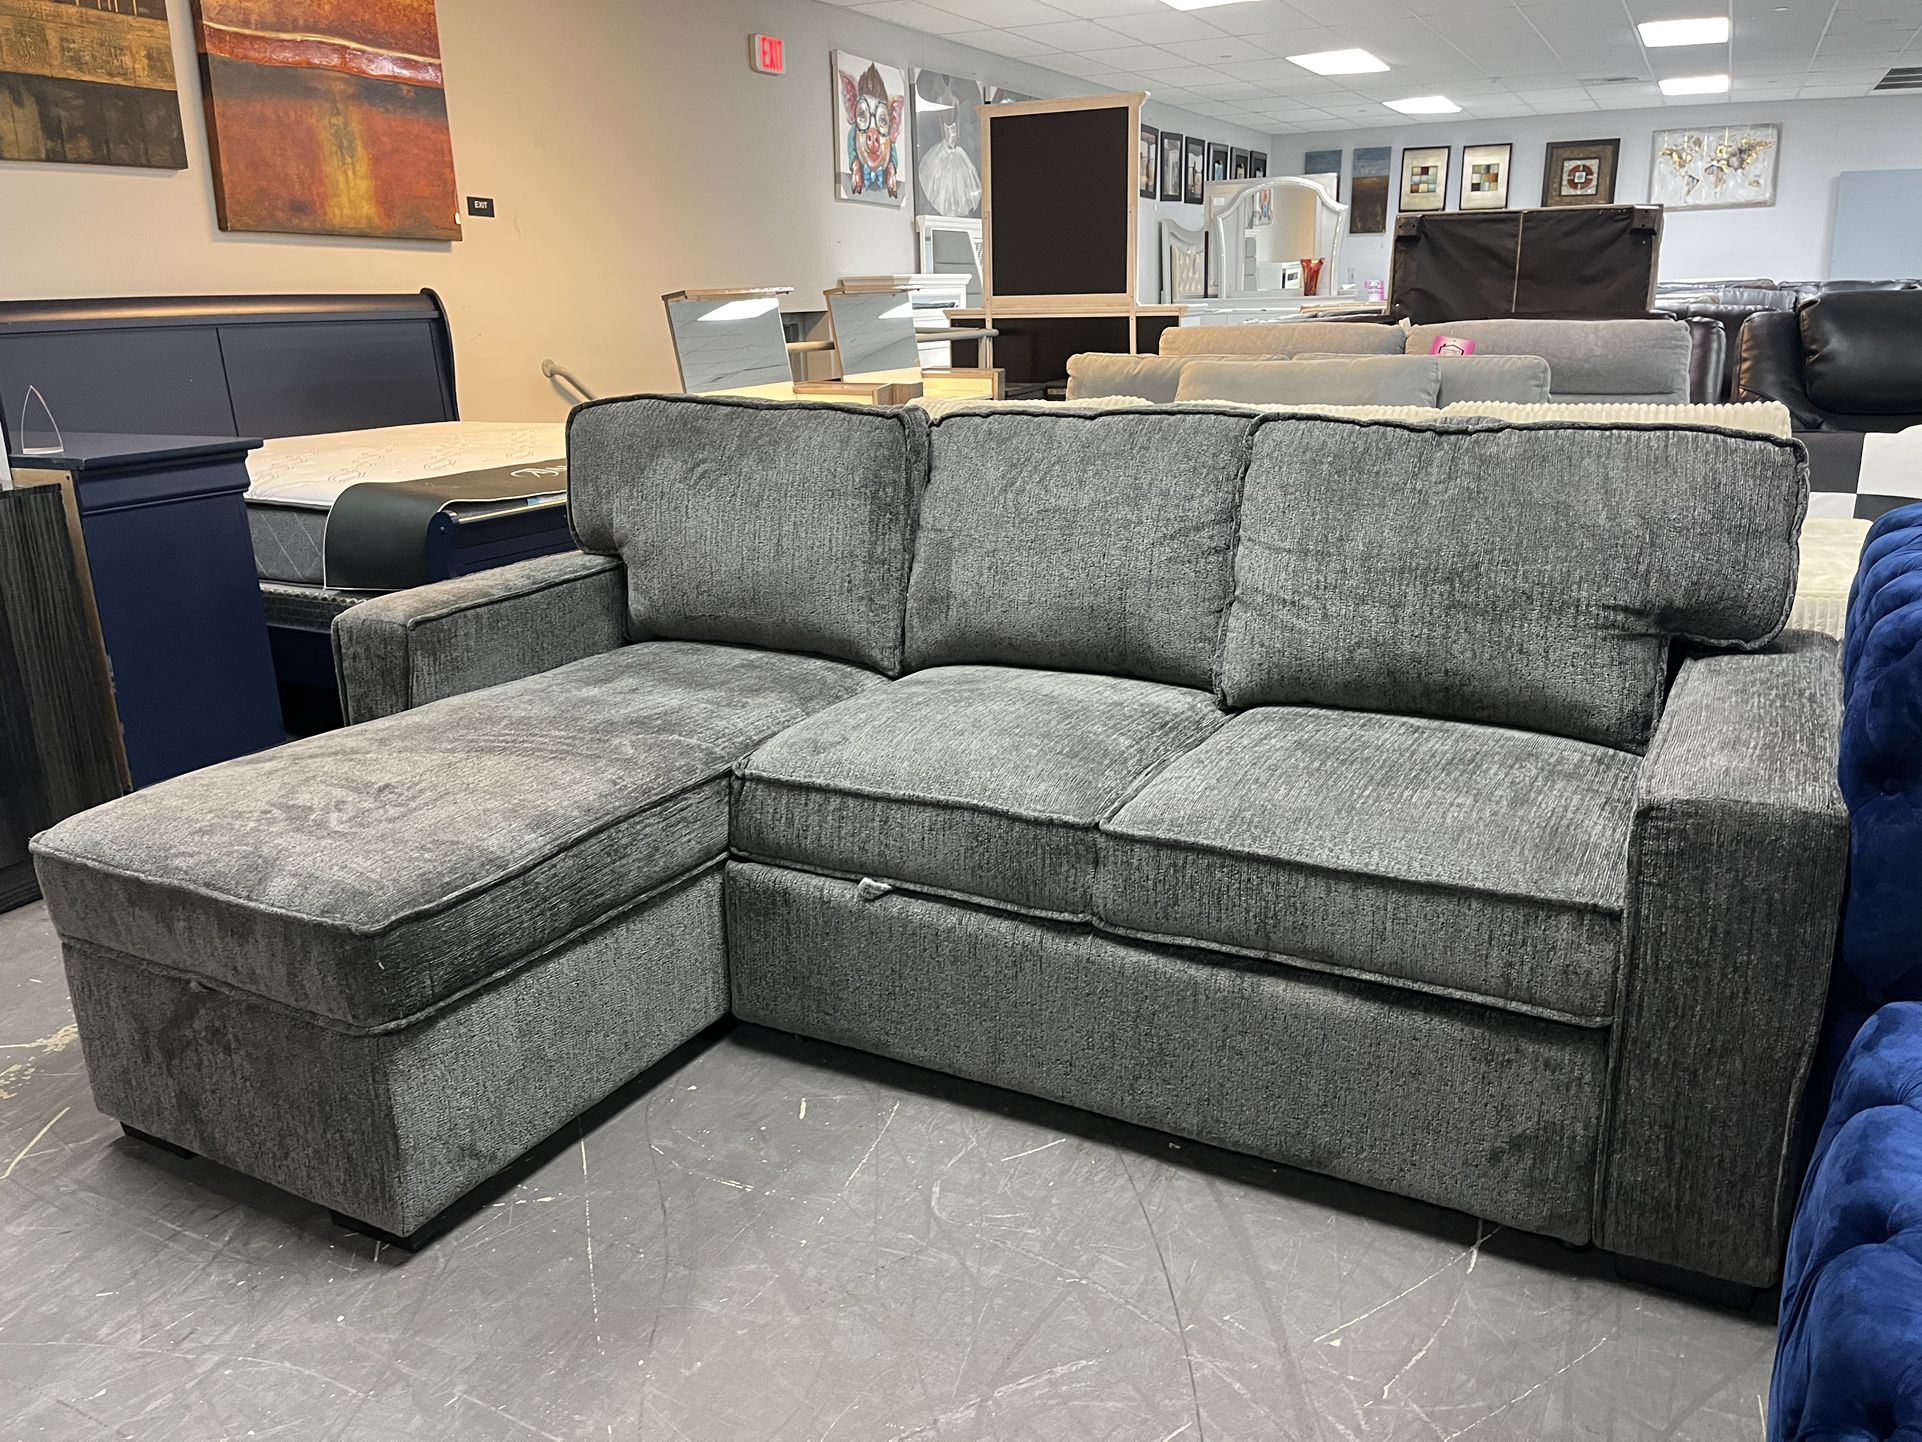 L SECTIONAL SLEEPER SOFA LIVING ROOM SET ON CLEARANCE STORE CLOSING EVERYTHING MUST GO OFFER ENDS 05/10 WHILE SUPPLIES LAST !!!!*****